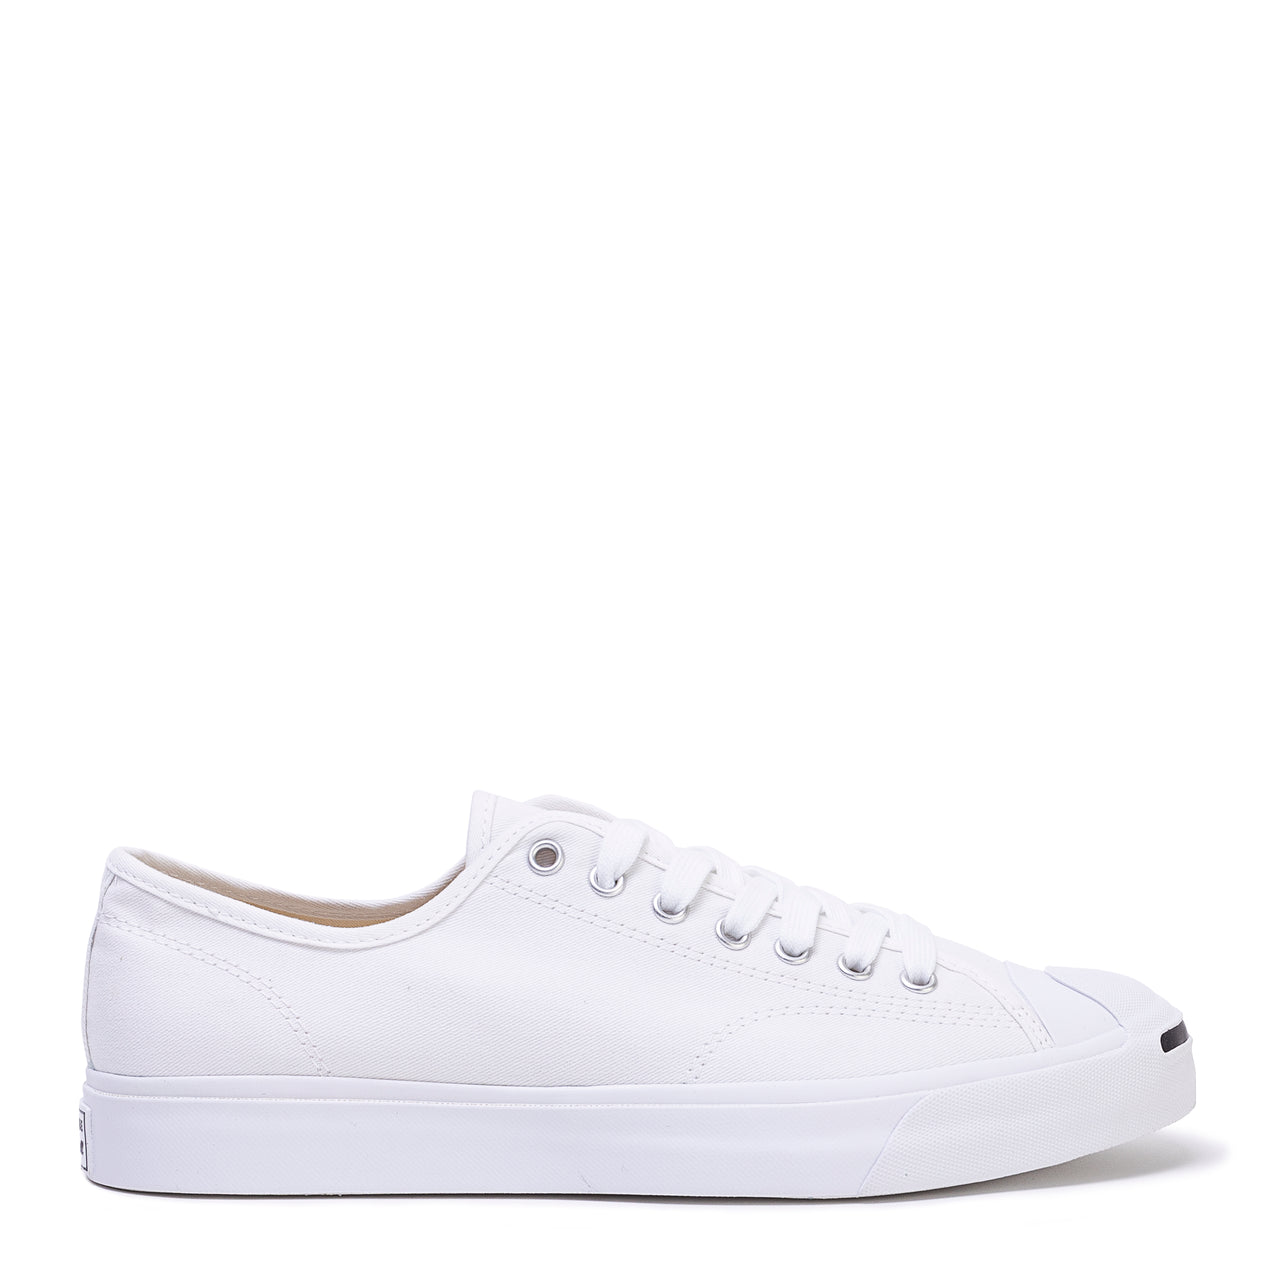 JACK PURCELL OX